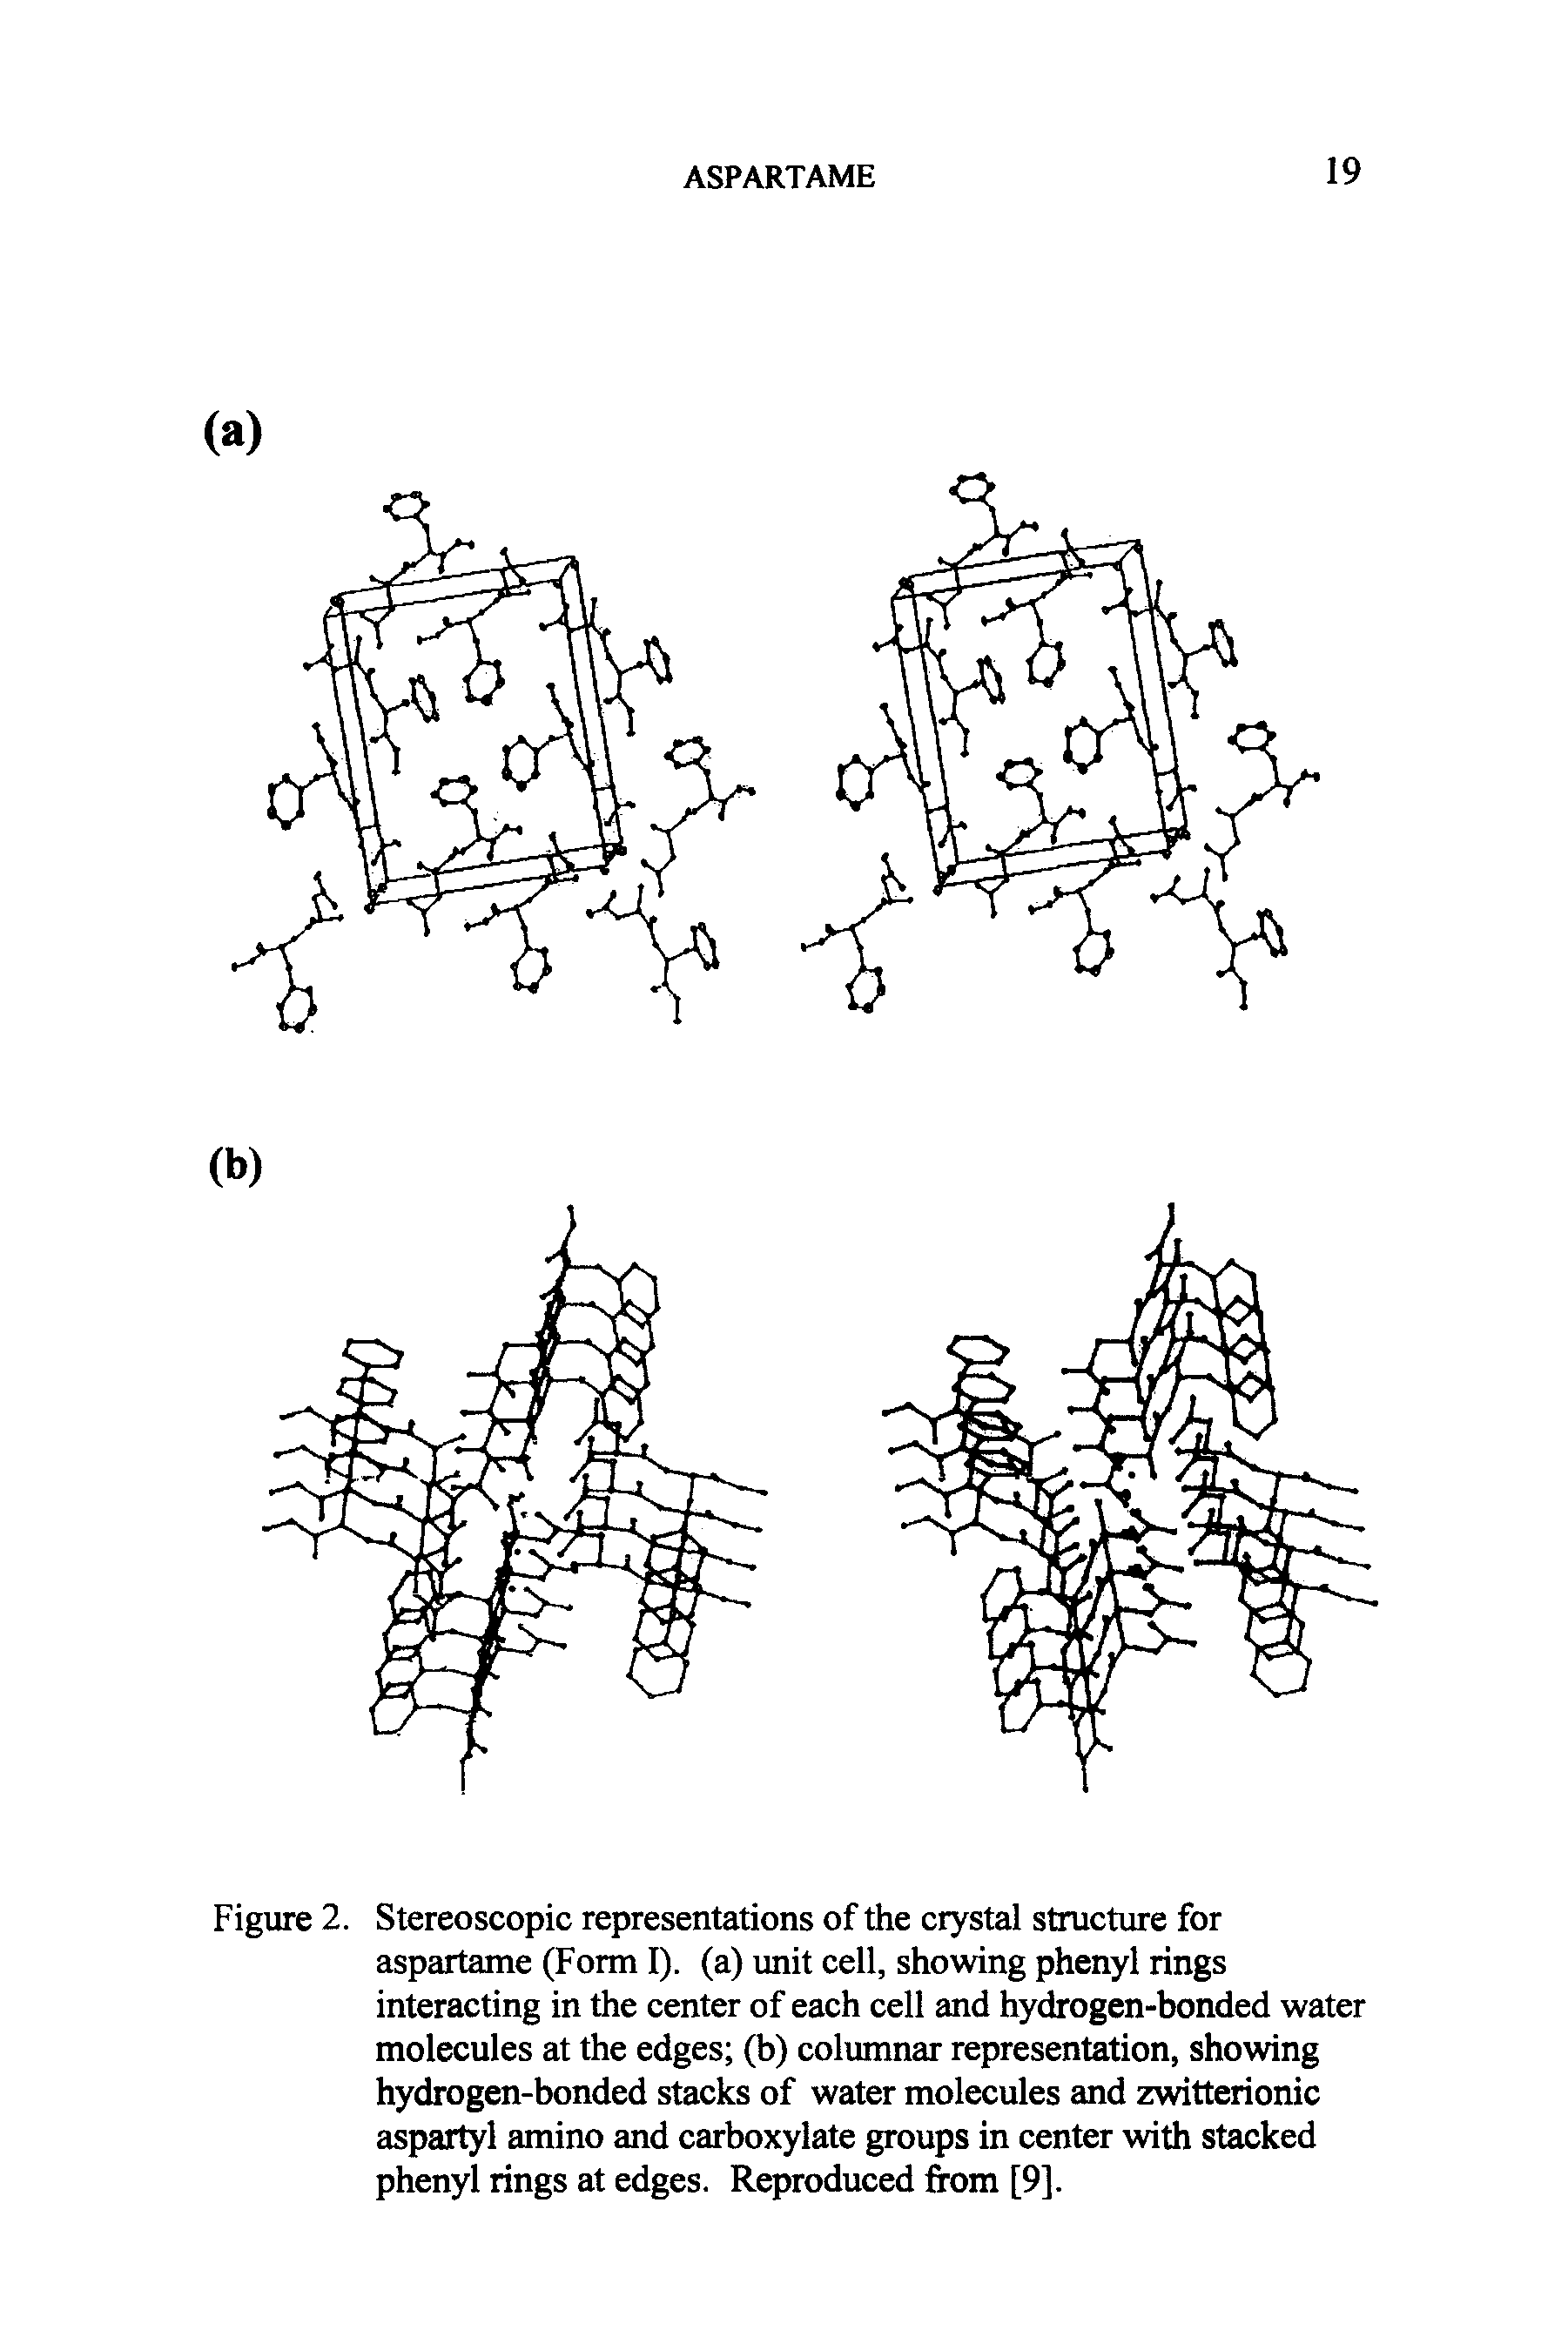 Figure 2. Stereoscopic representations of the crystal structure for aspartame (Form I). (a) unit cell, showing phenyl rings interacting in the center of each cell and hydrogen-bonded water molecules at the edges (b) columnar representation, showing hydrogen-bonded stacks of water molecules and zwitterionic aspartyl amino and carboxylate groups in center with stacked phenyl rings at edges. Reproduced from [9].